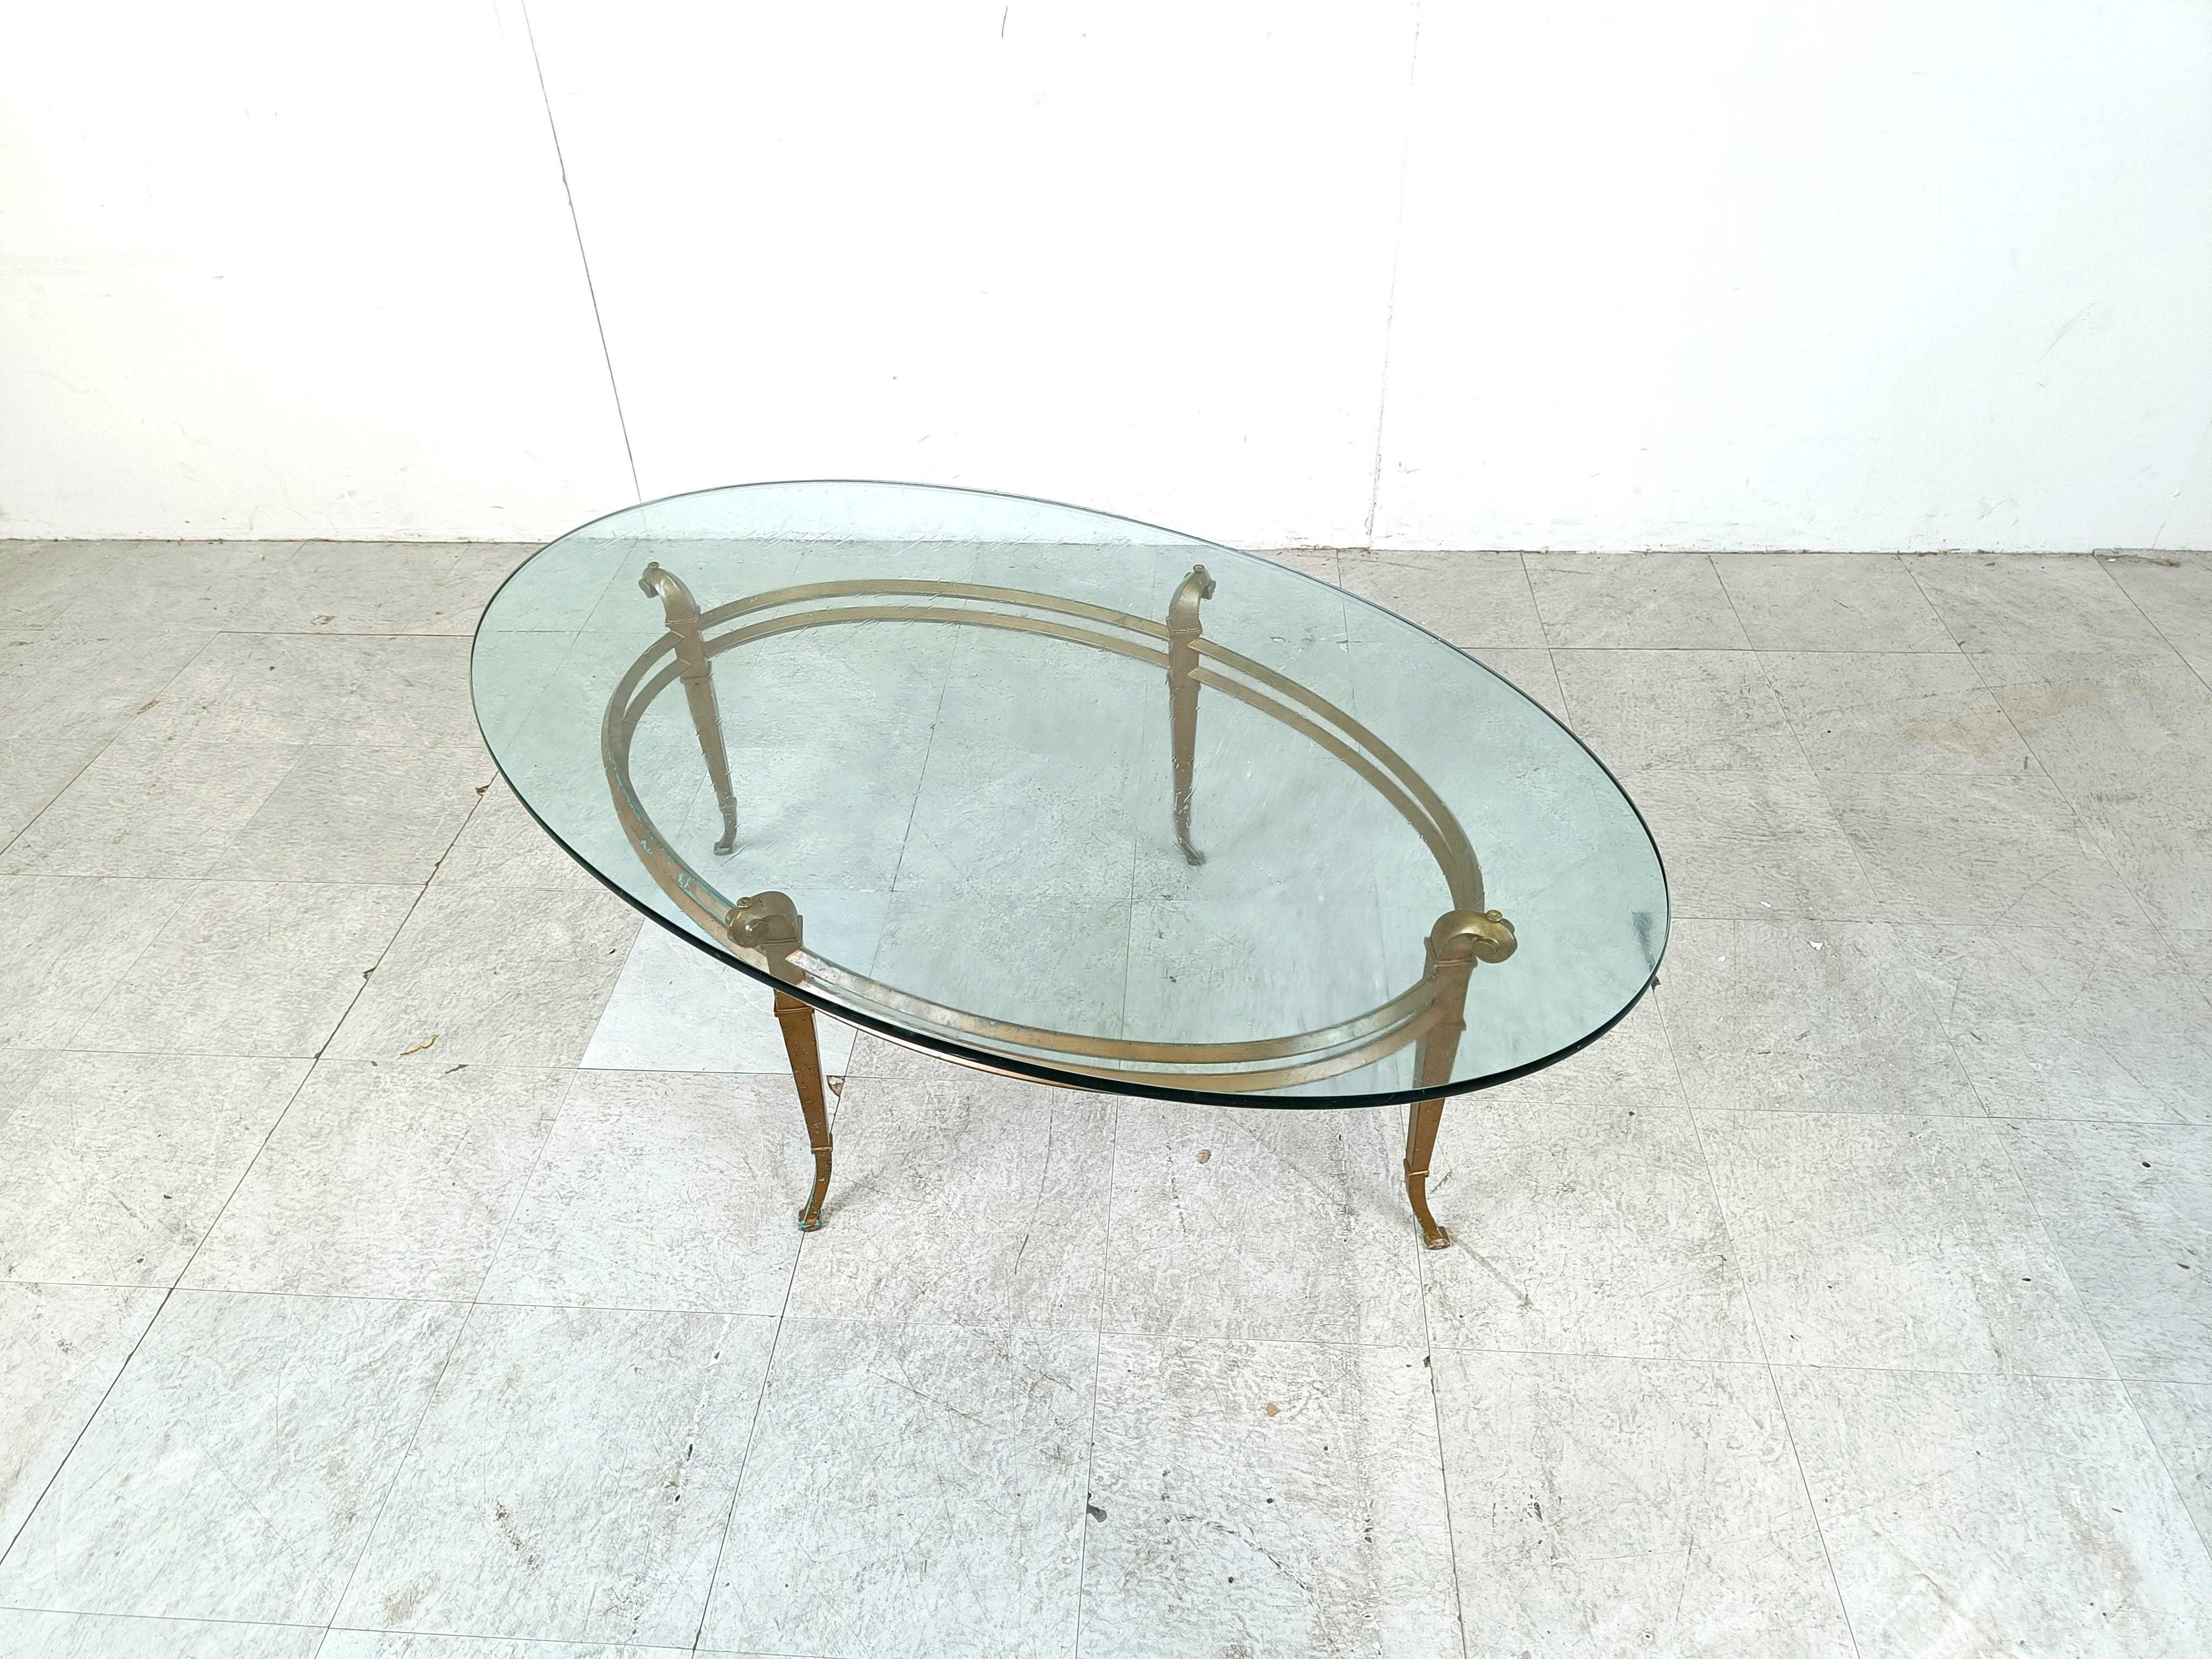 Vintage coffee table with a golden steel frame and a clear oval glass top.

Beautiful bent metal legs with a double oval ring.

Timeless design.

1970s - Spain

The table is in good vintage condition with normal age related wear, some scuffs to the